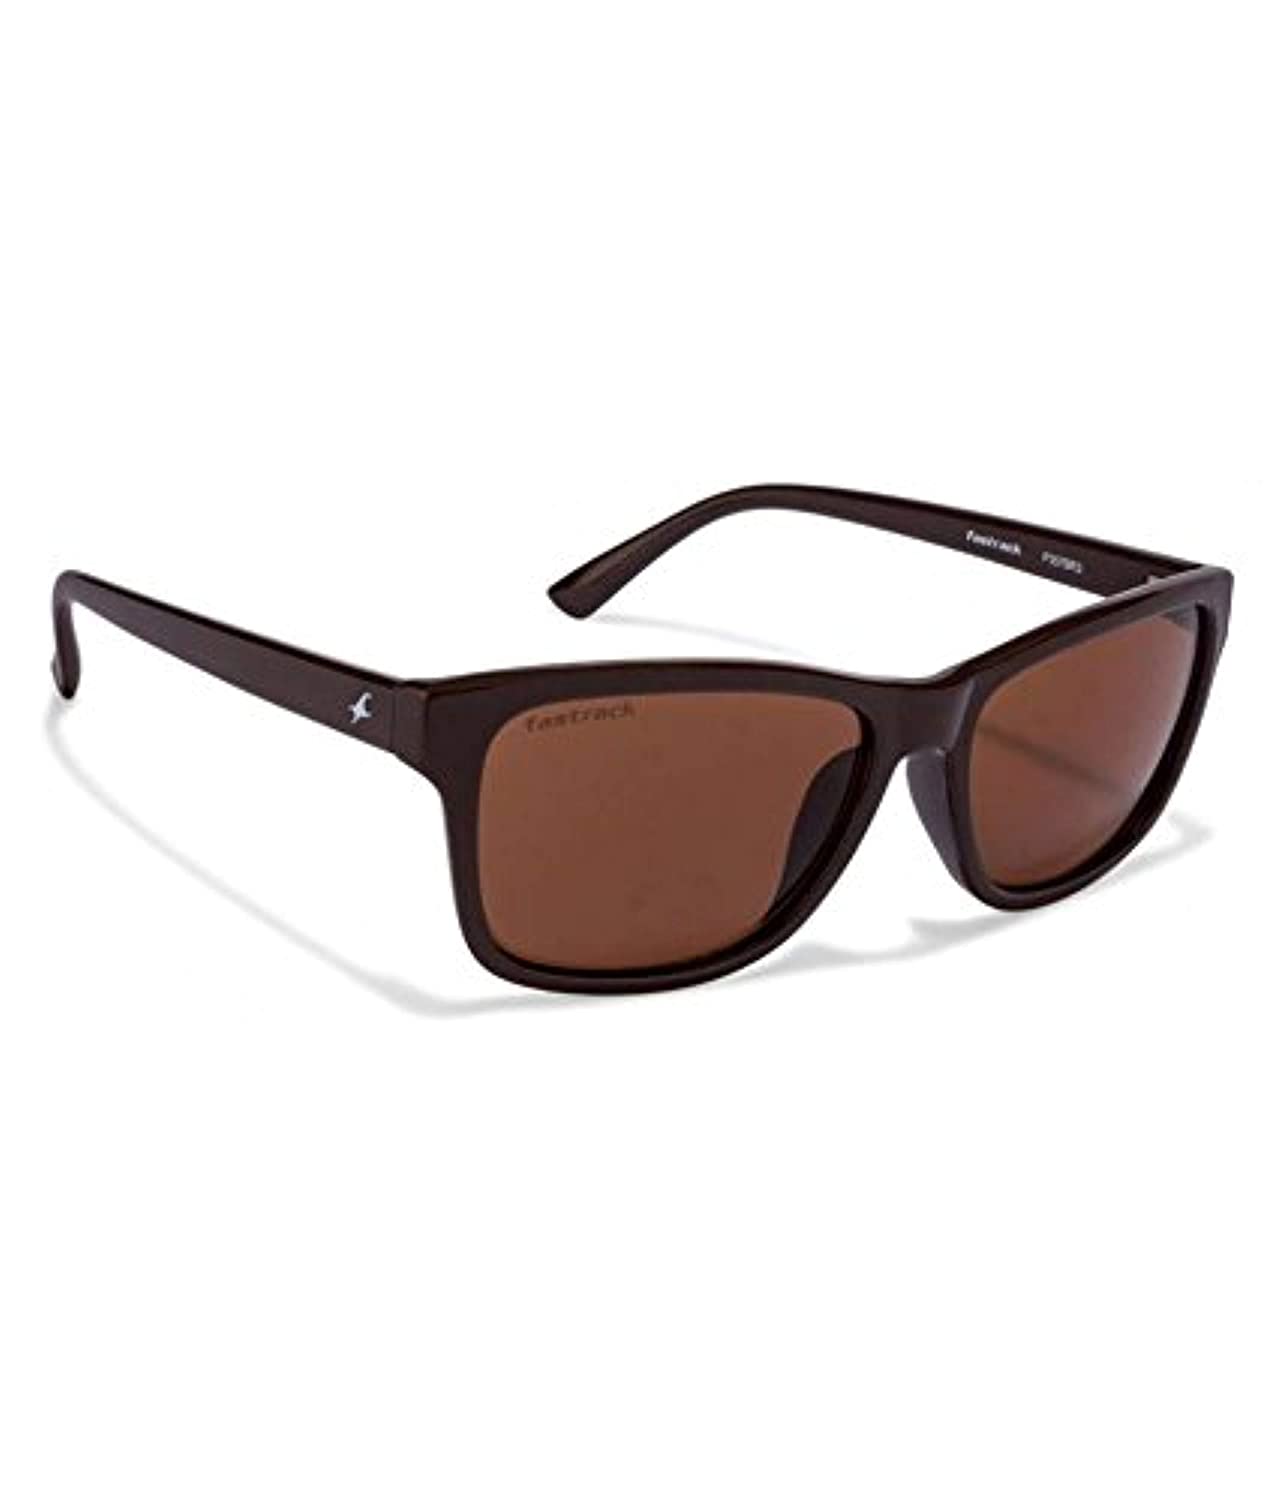 Brown Fastrack Sunglasses for Men and Women P357BR3